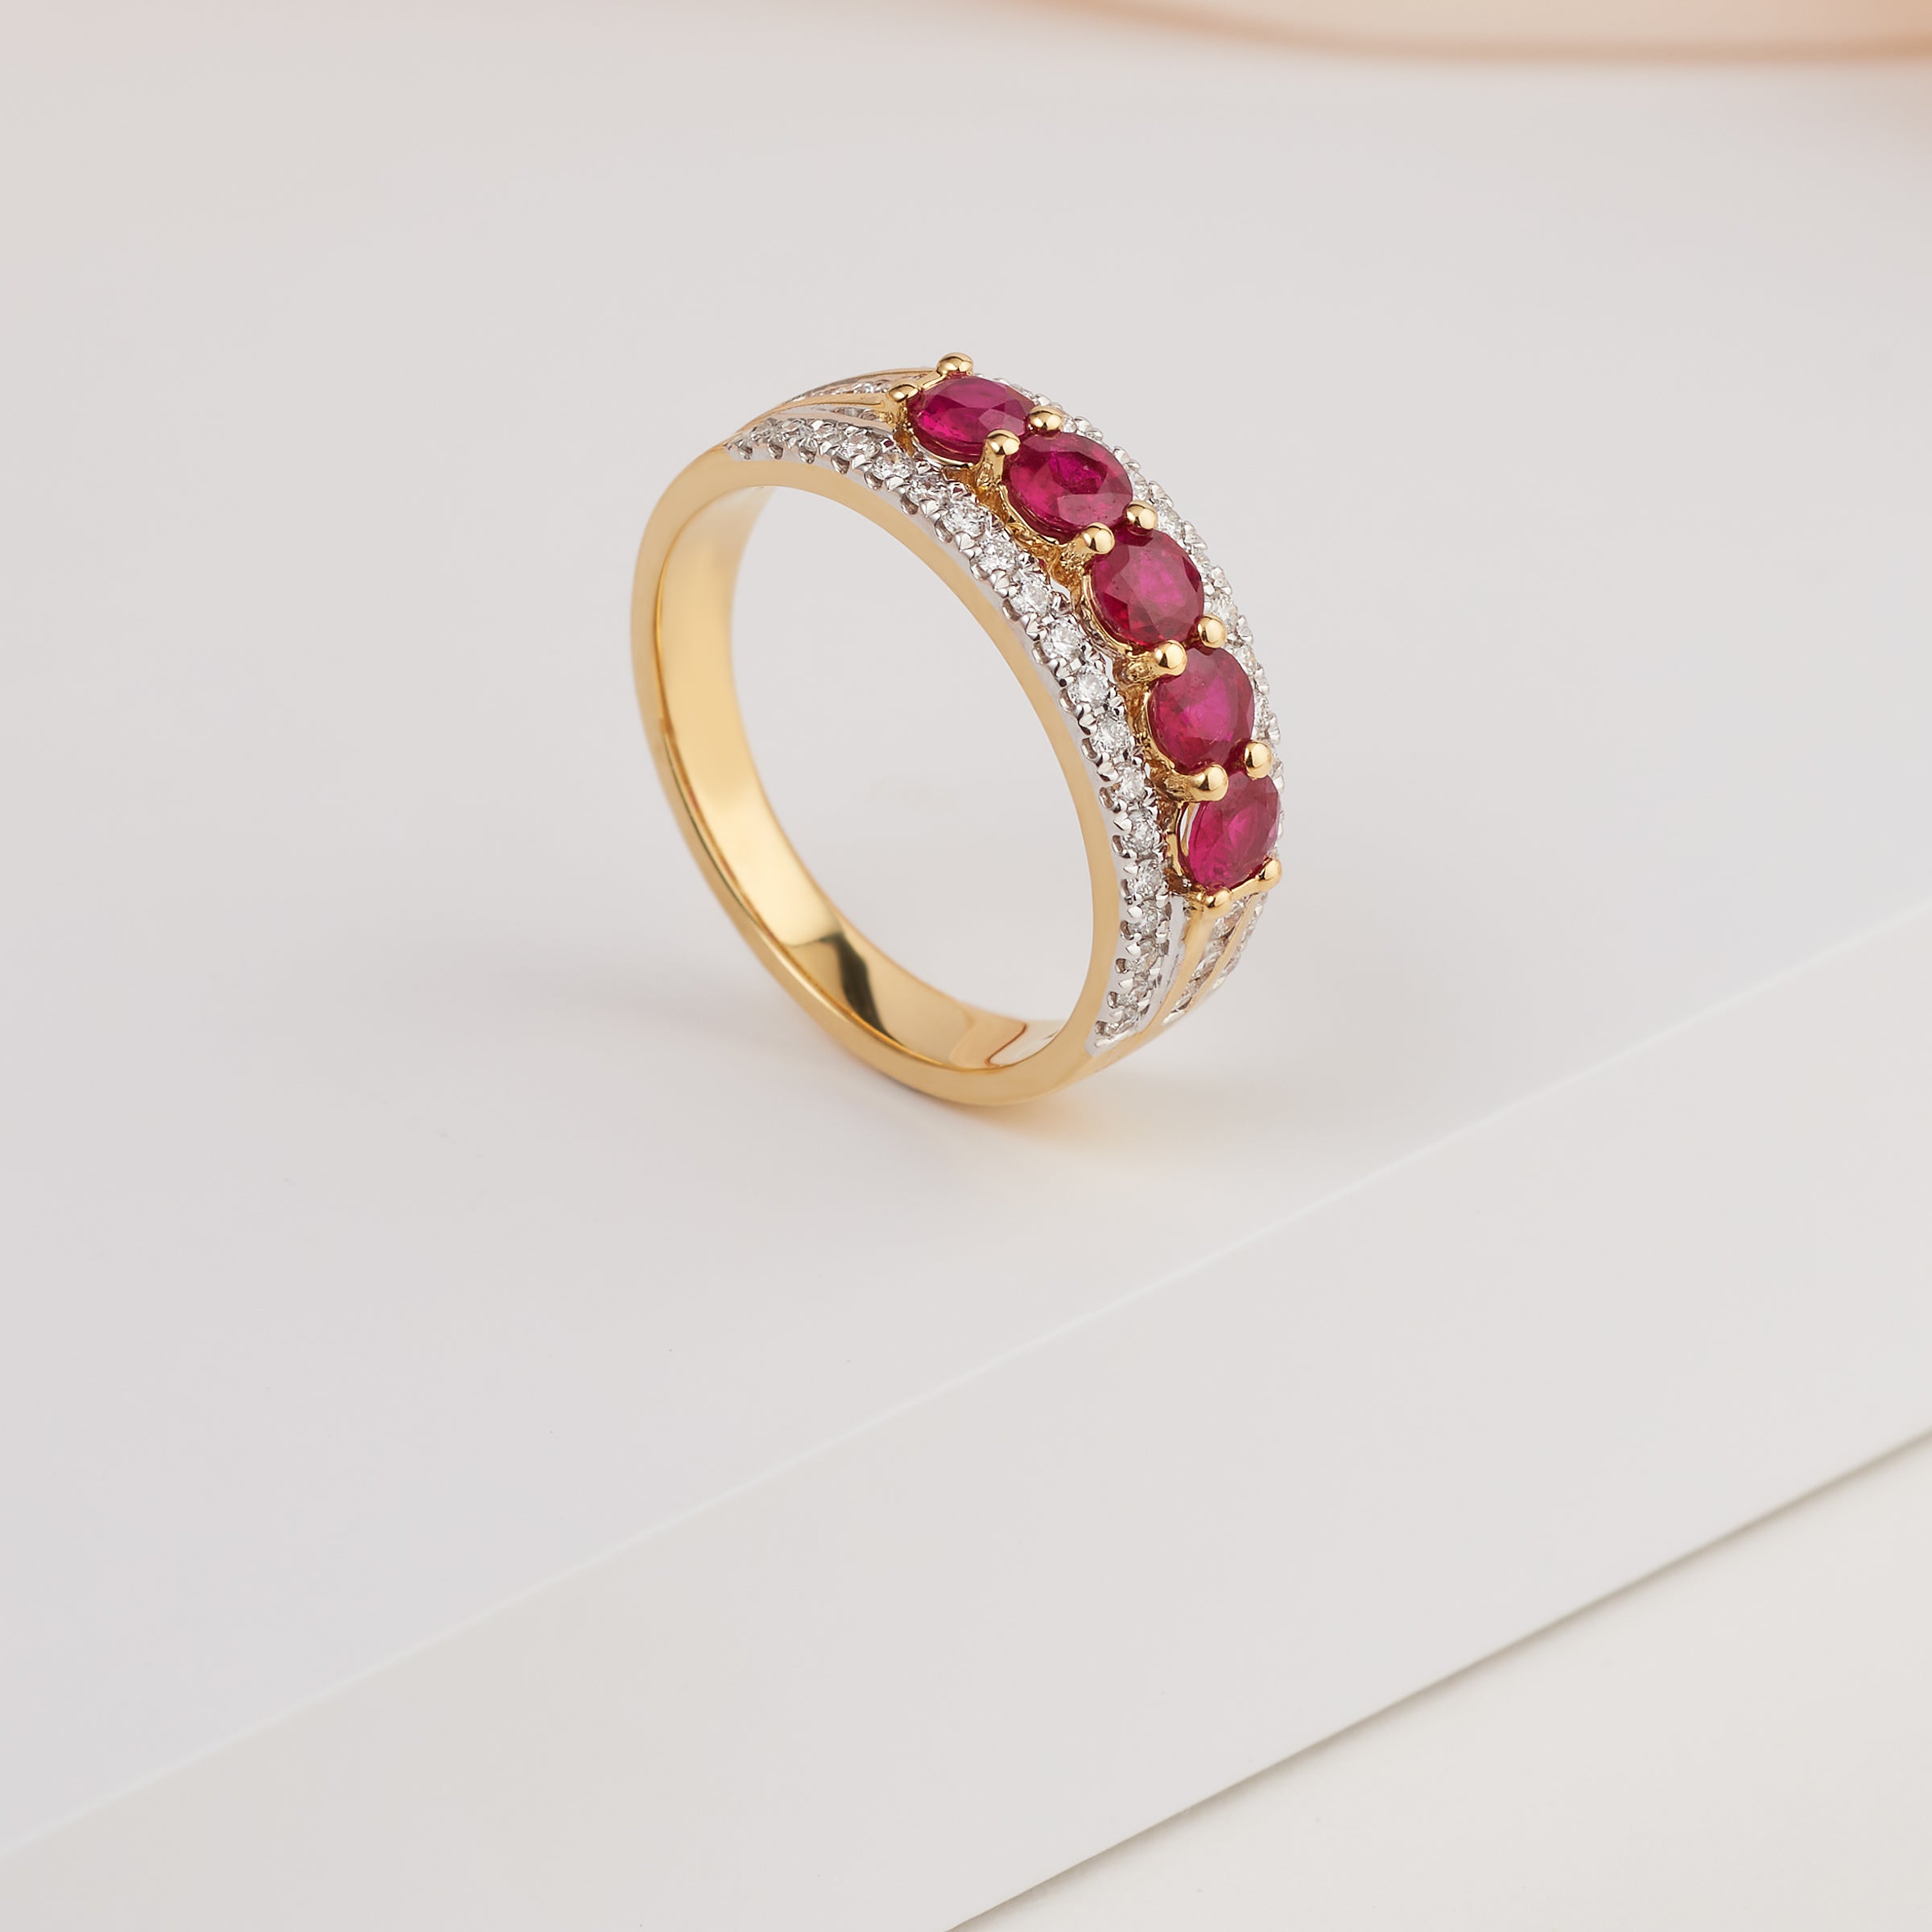 Coloured Gemstone, Sapphire & Ruby Engagement Rings in Melbourne